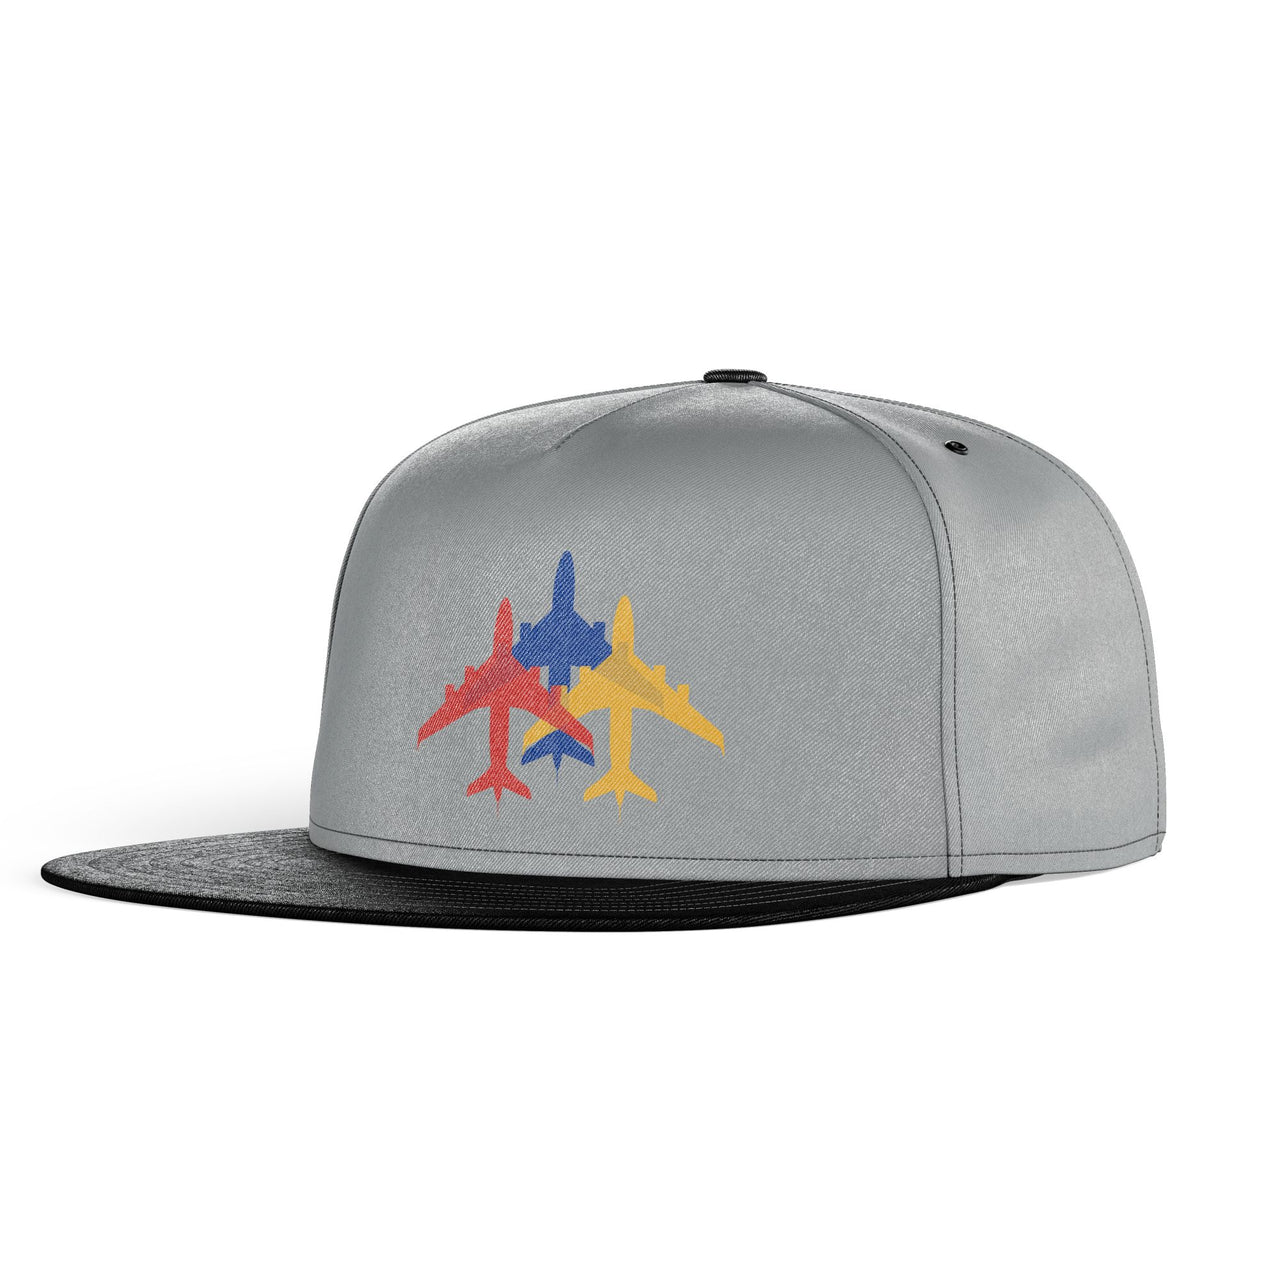 Colourful 3 Airplanes Designed Snapback Caps & Hats